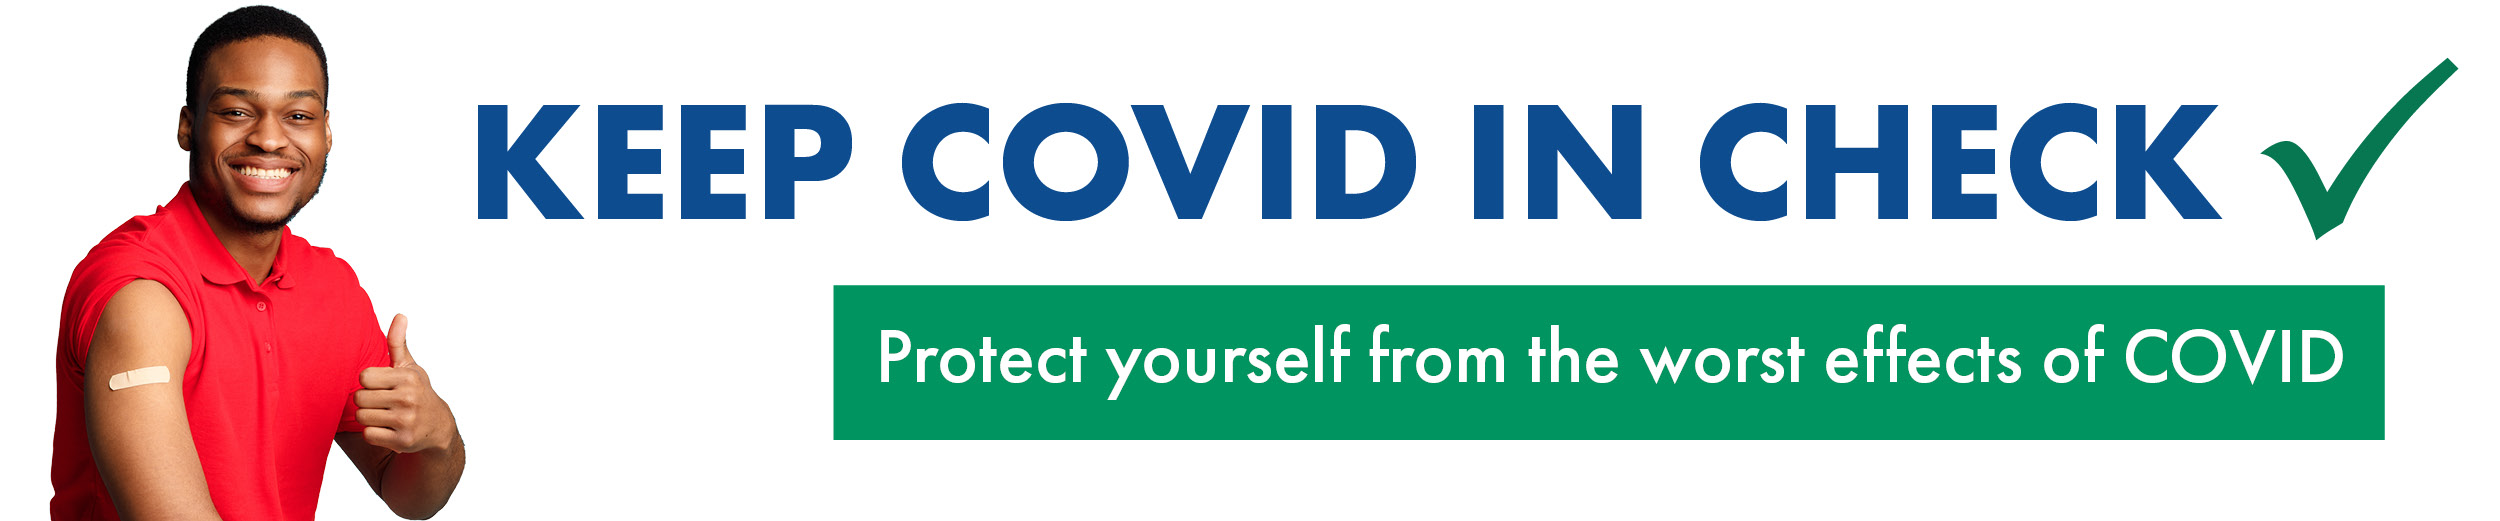 *Man in red shirt with thumbs up and bandage on arm from vaccination* Keep Covid in Check - Protect yourself from the worst effects of COVID - Get protected from the worst effects of COVID."